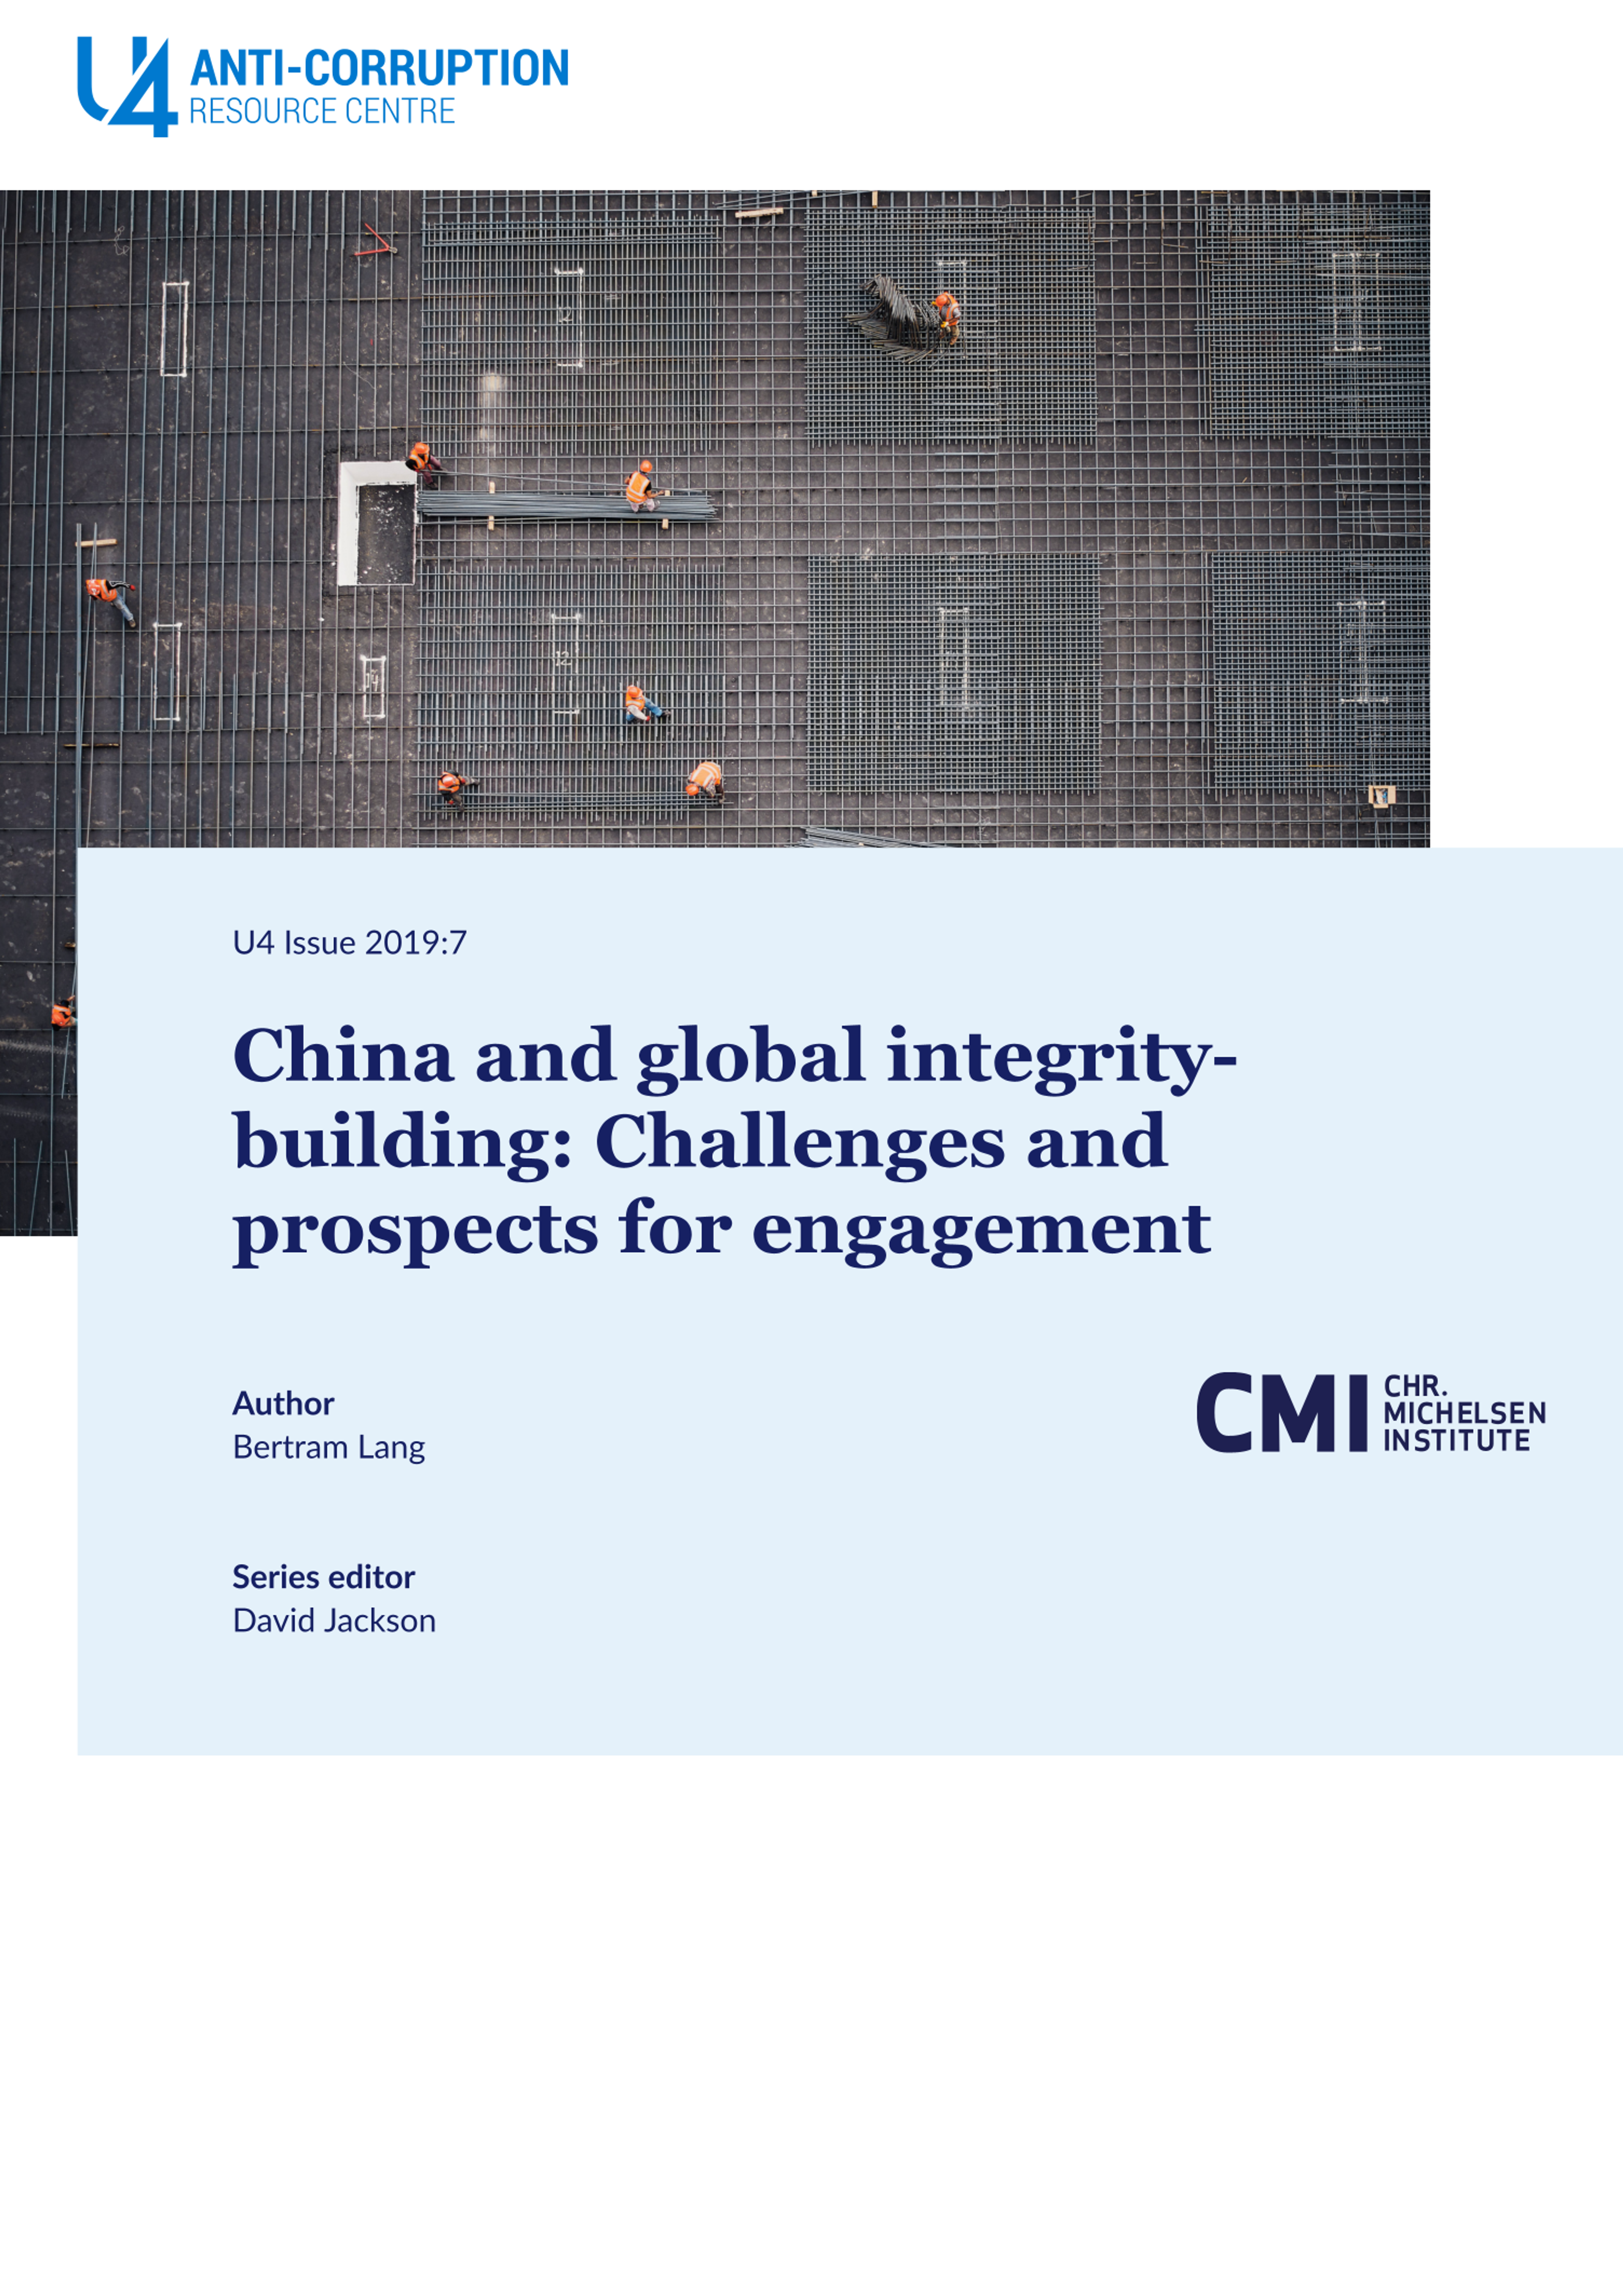 China and global integrity-building: Challenges and prospects for engagement